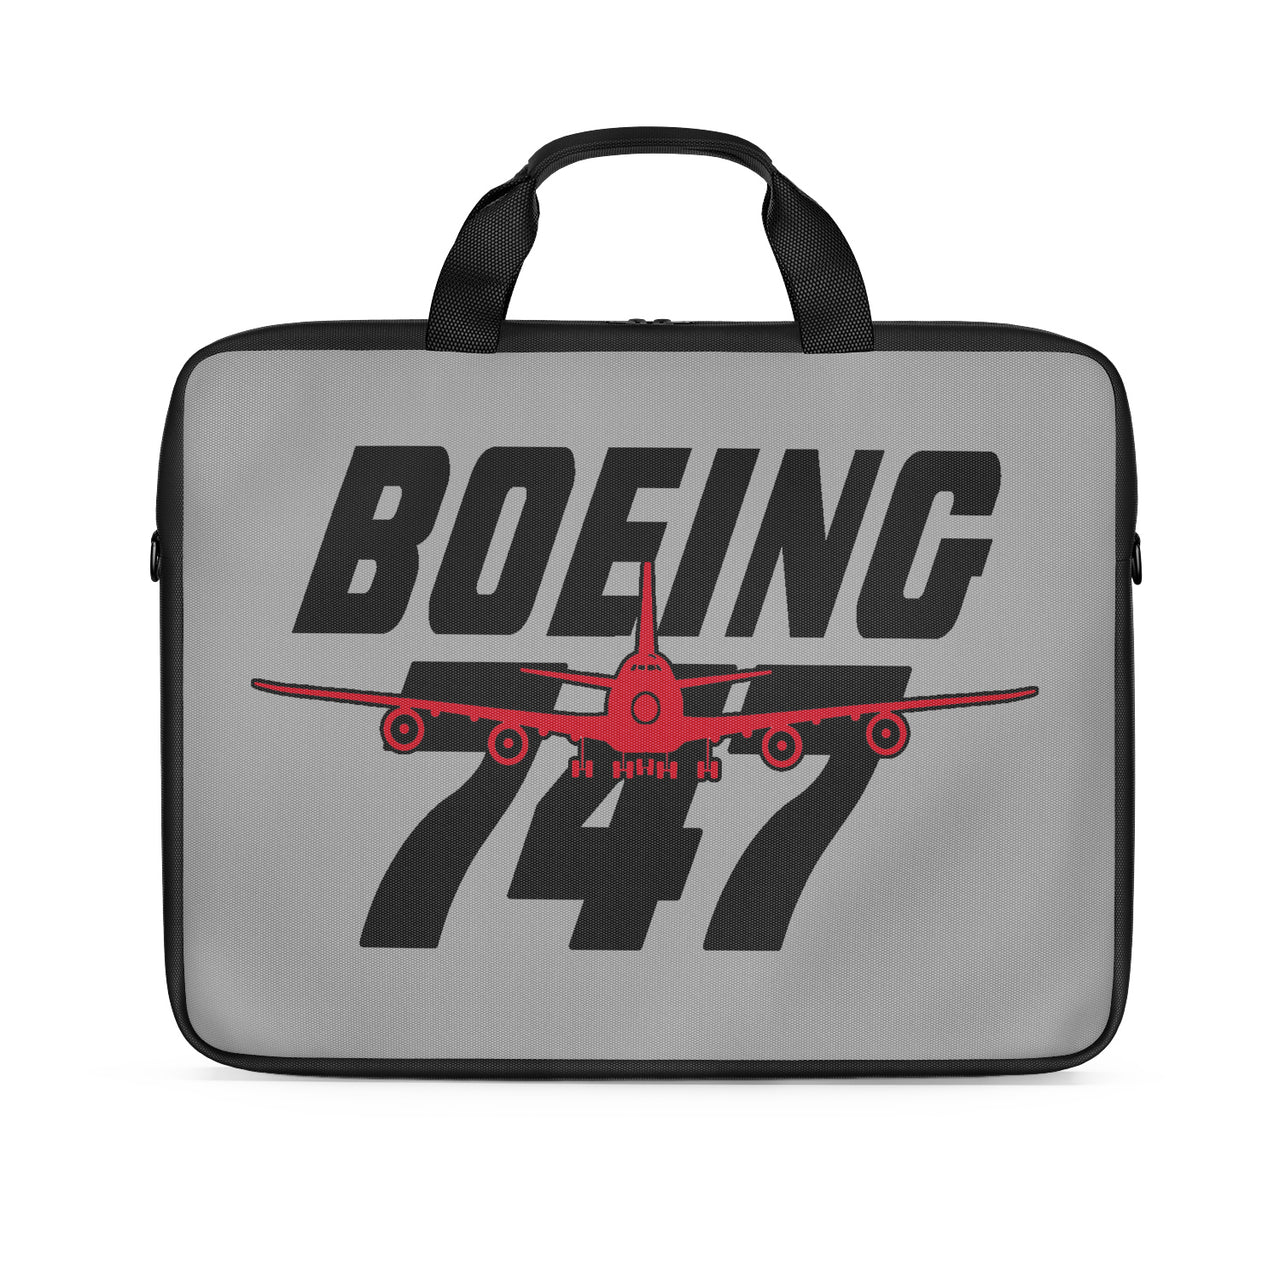 Amazing Boeing 747 Designed Laptop & Tablet Bags